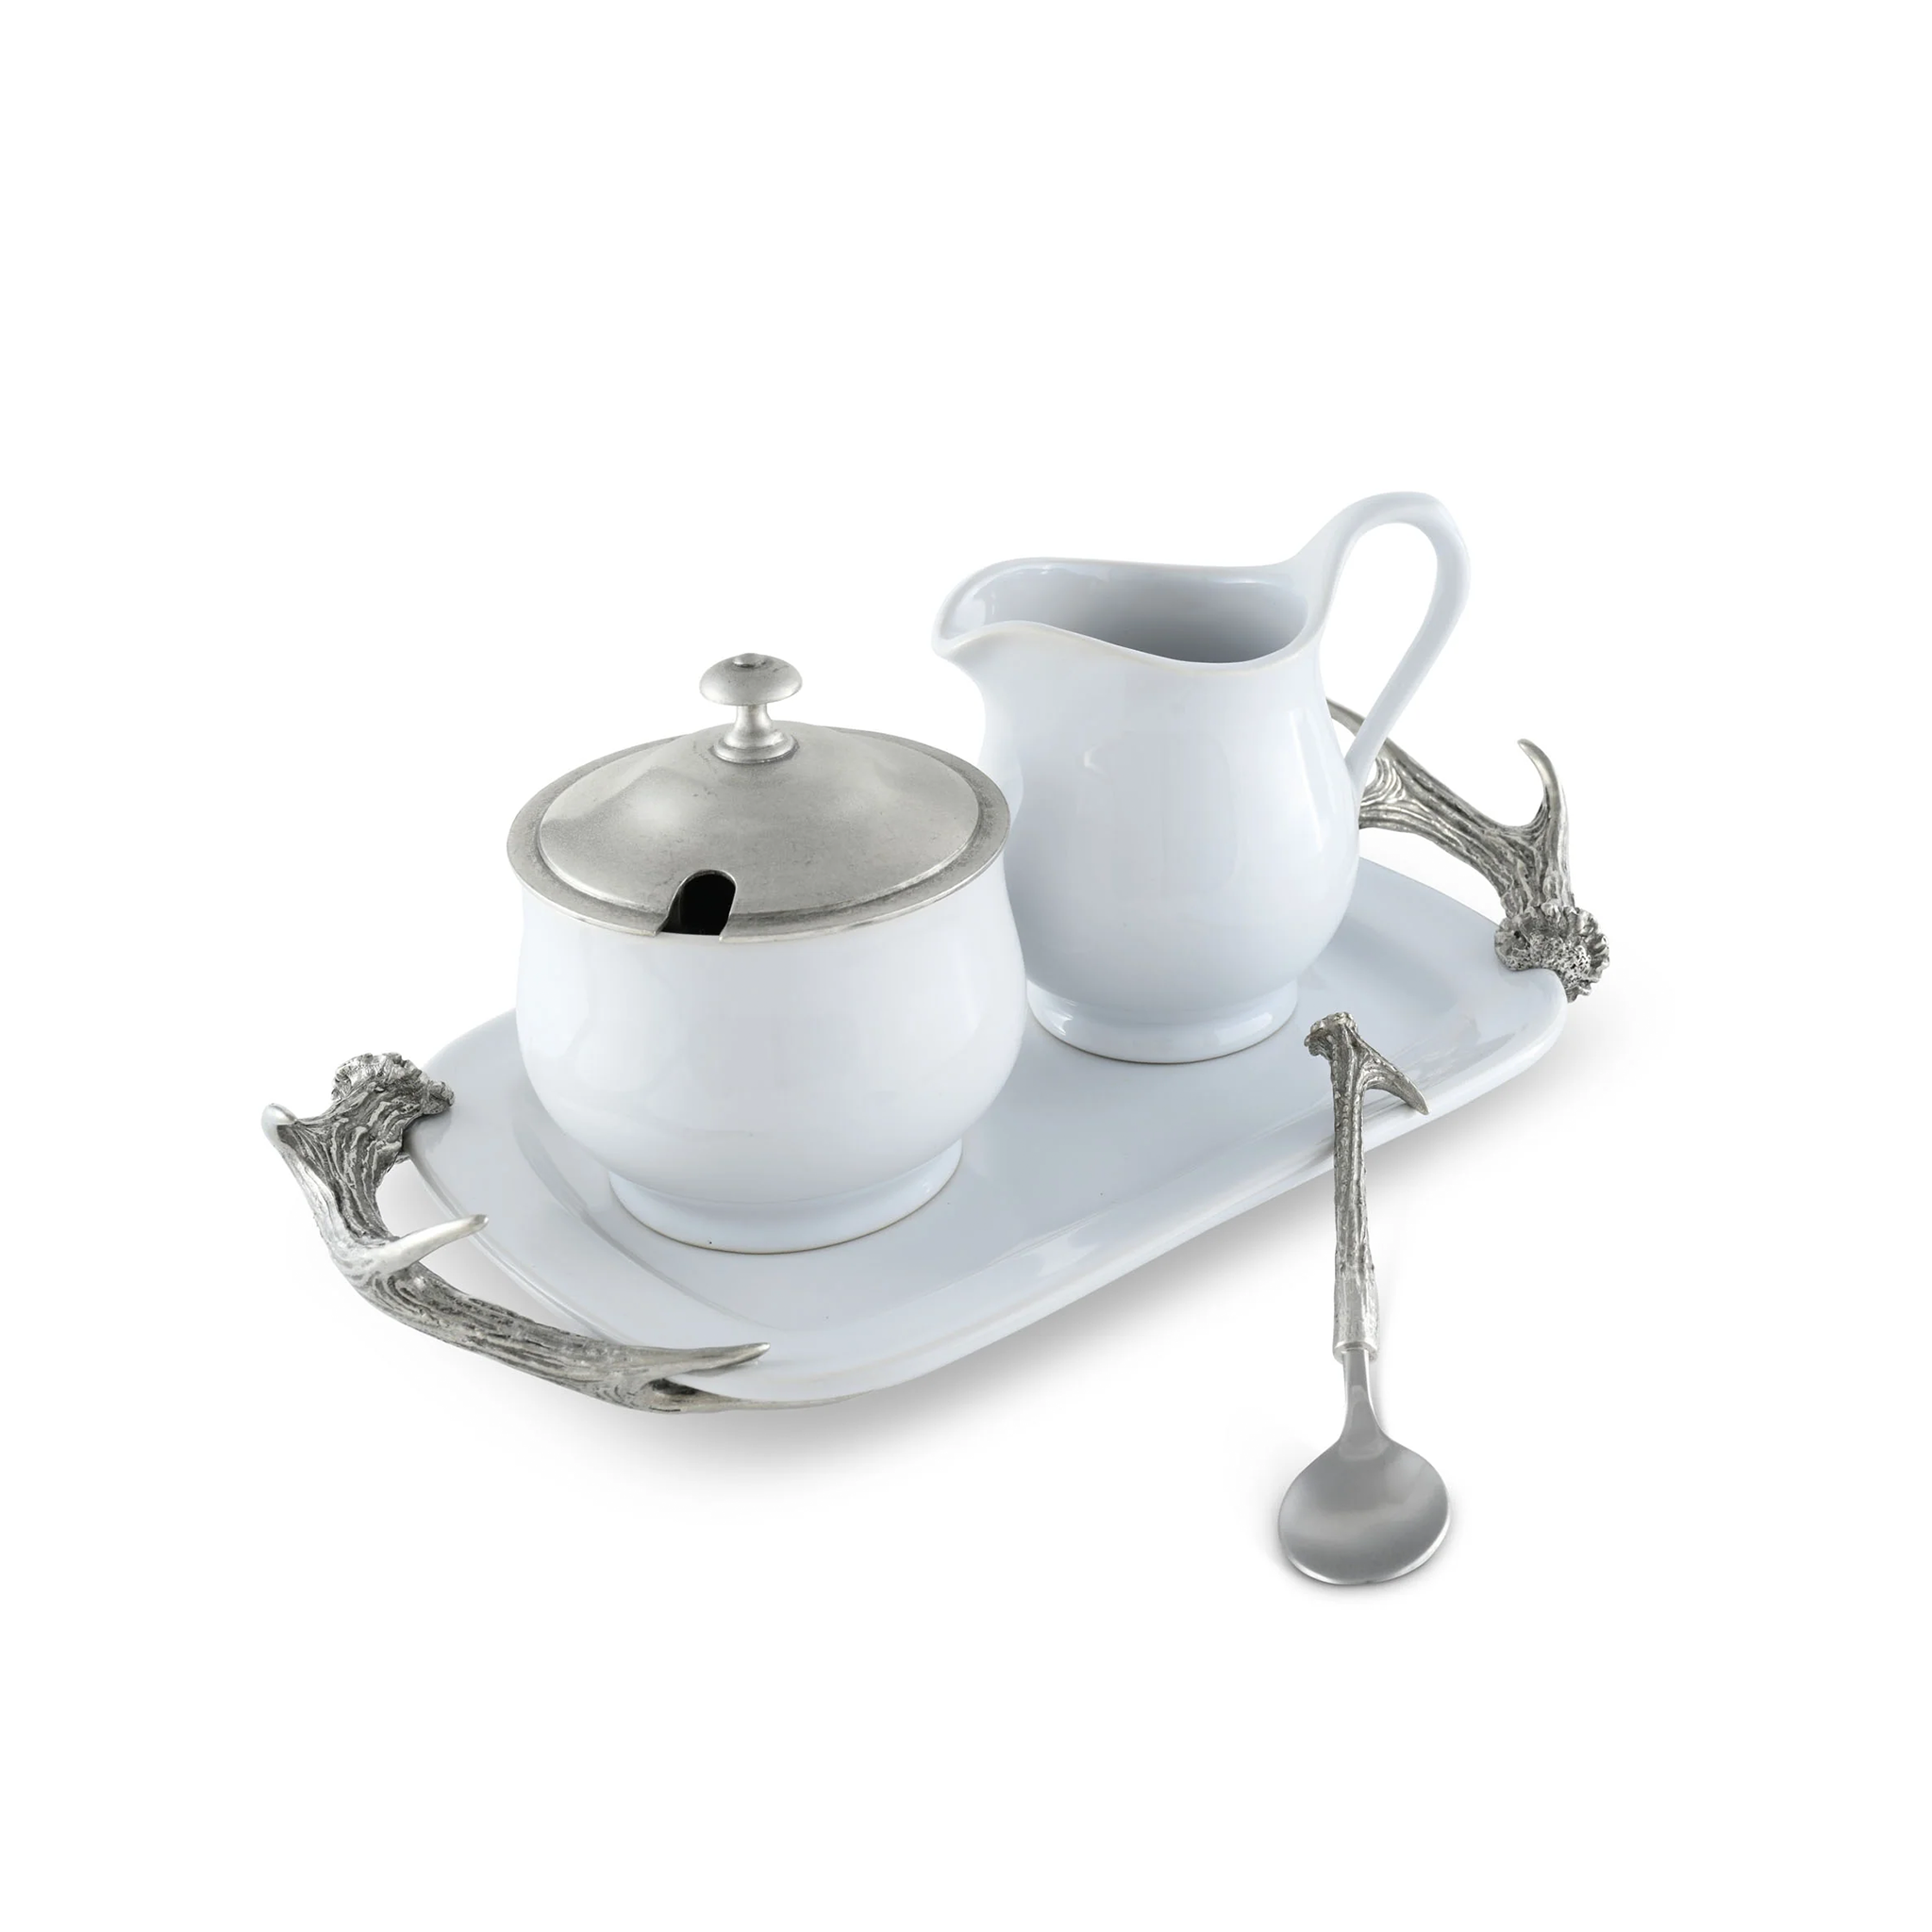 a porcelain and pewter creamer set and tray on a white surface